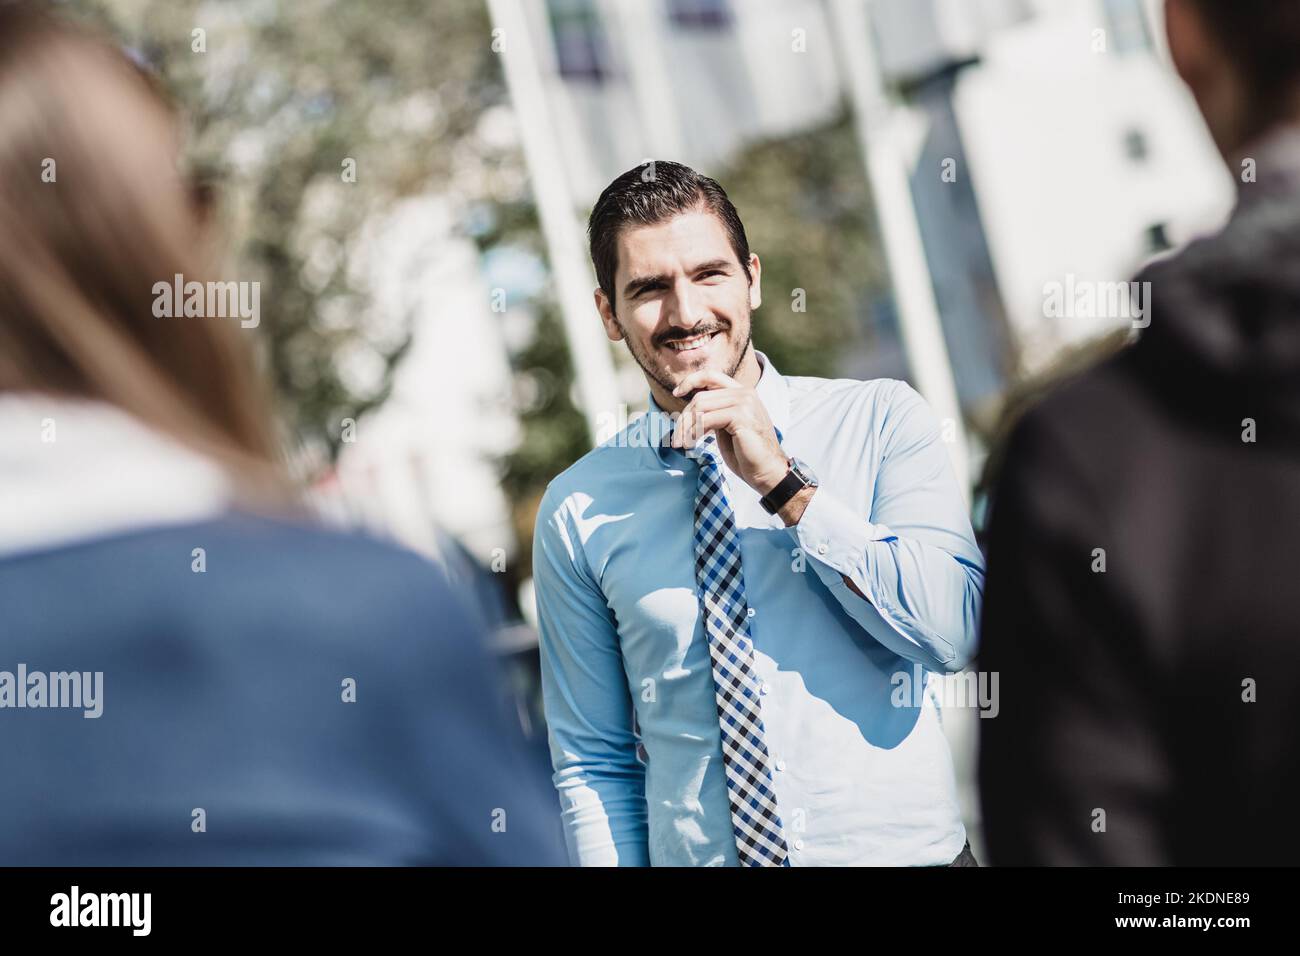 Attractive young businessman with a friendly smile having informal out of office meeting on a suny day. Stock Photo